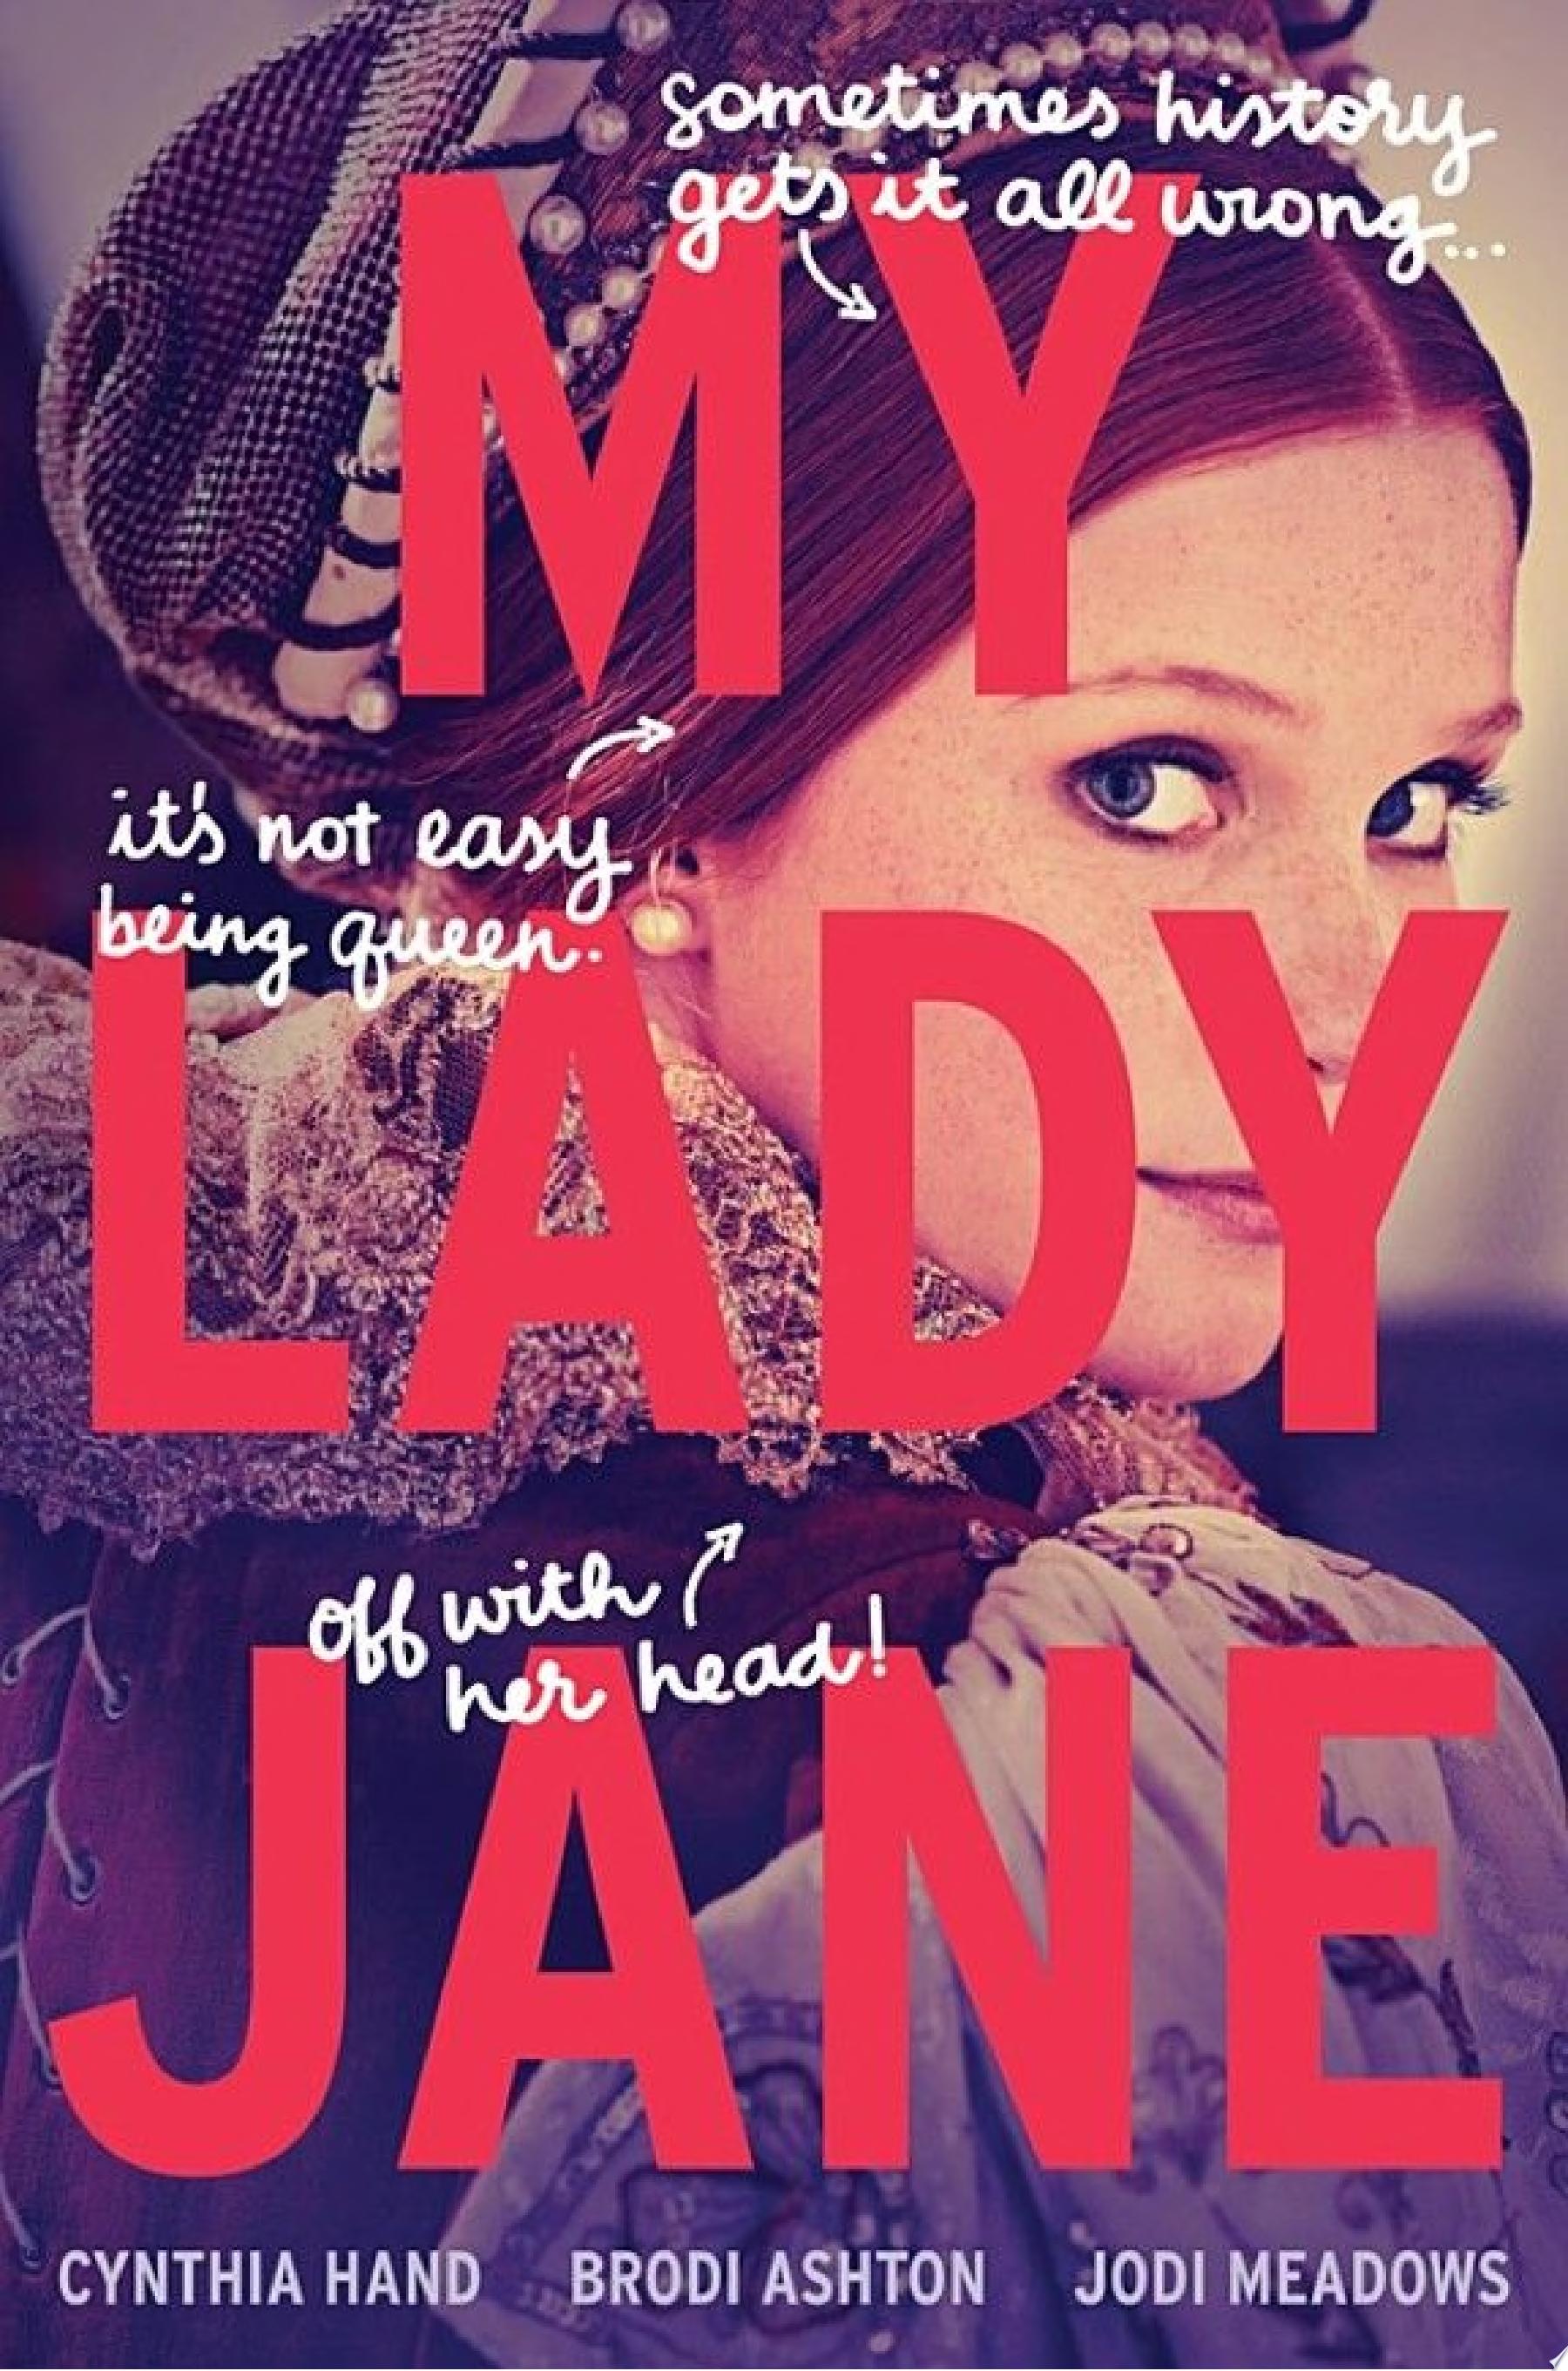 Image for "My Lady Jane"